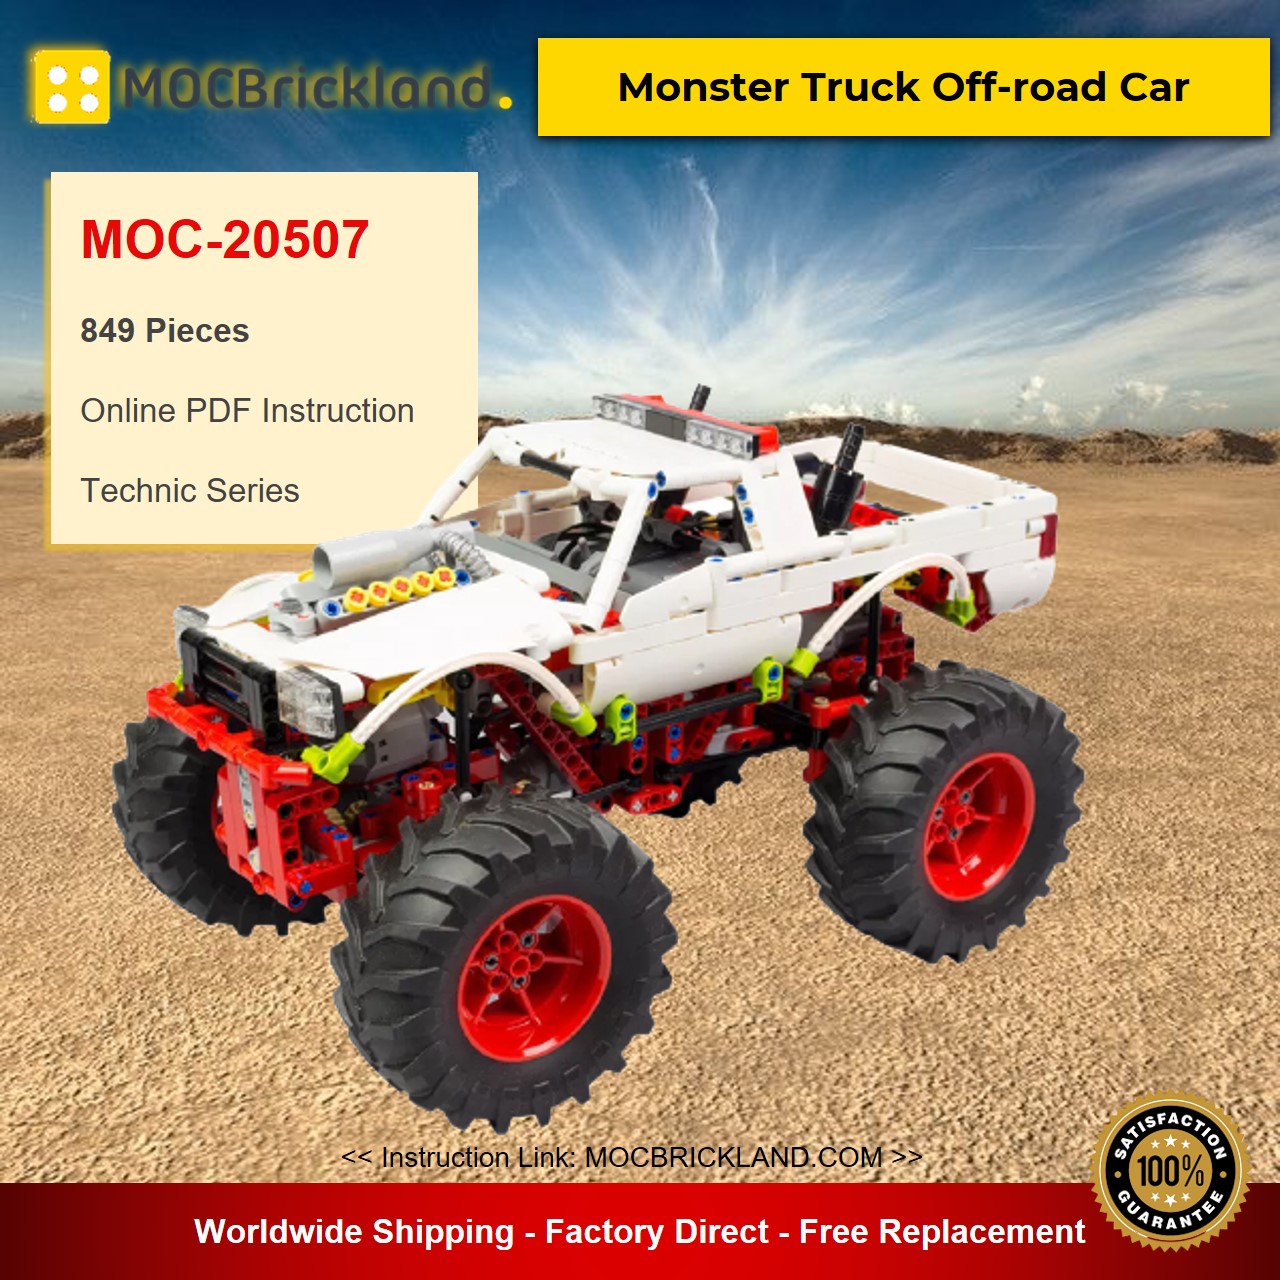 MOC-20507 Technic Monster Truck Off-road Car By Nico71 With 849 Pieces